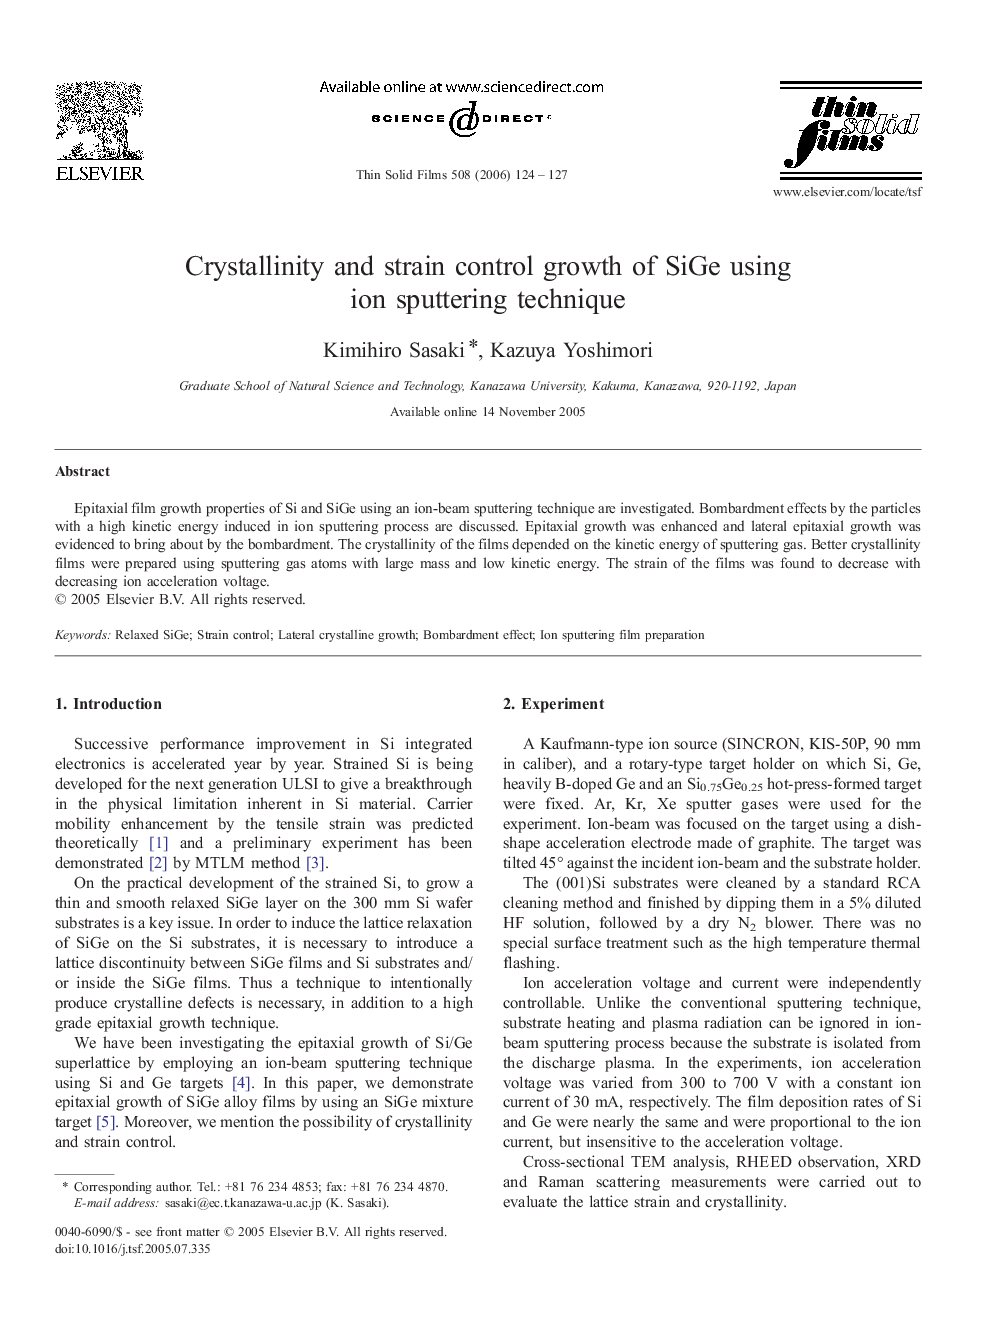 Crystallinity and strain control growth of SiGe using ion sputtering technique